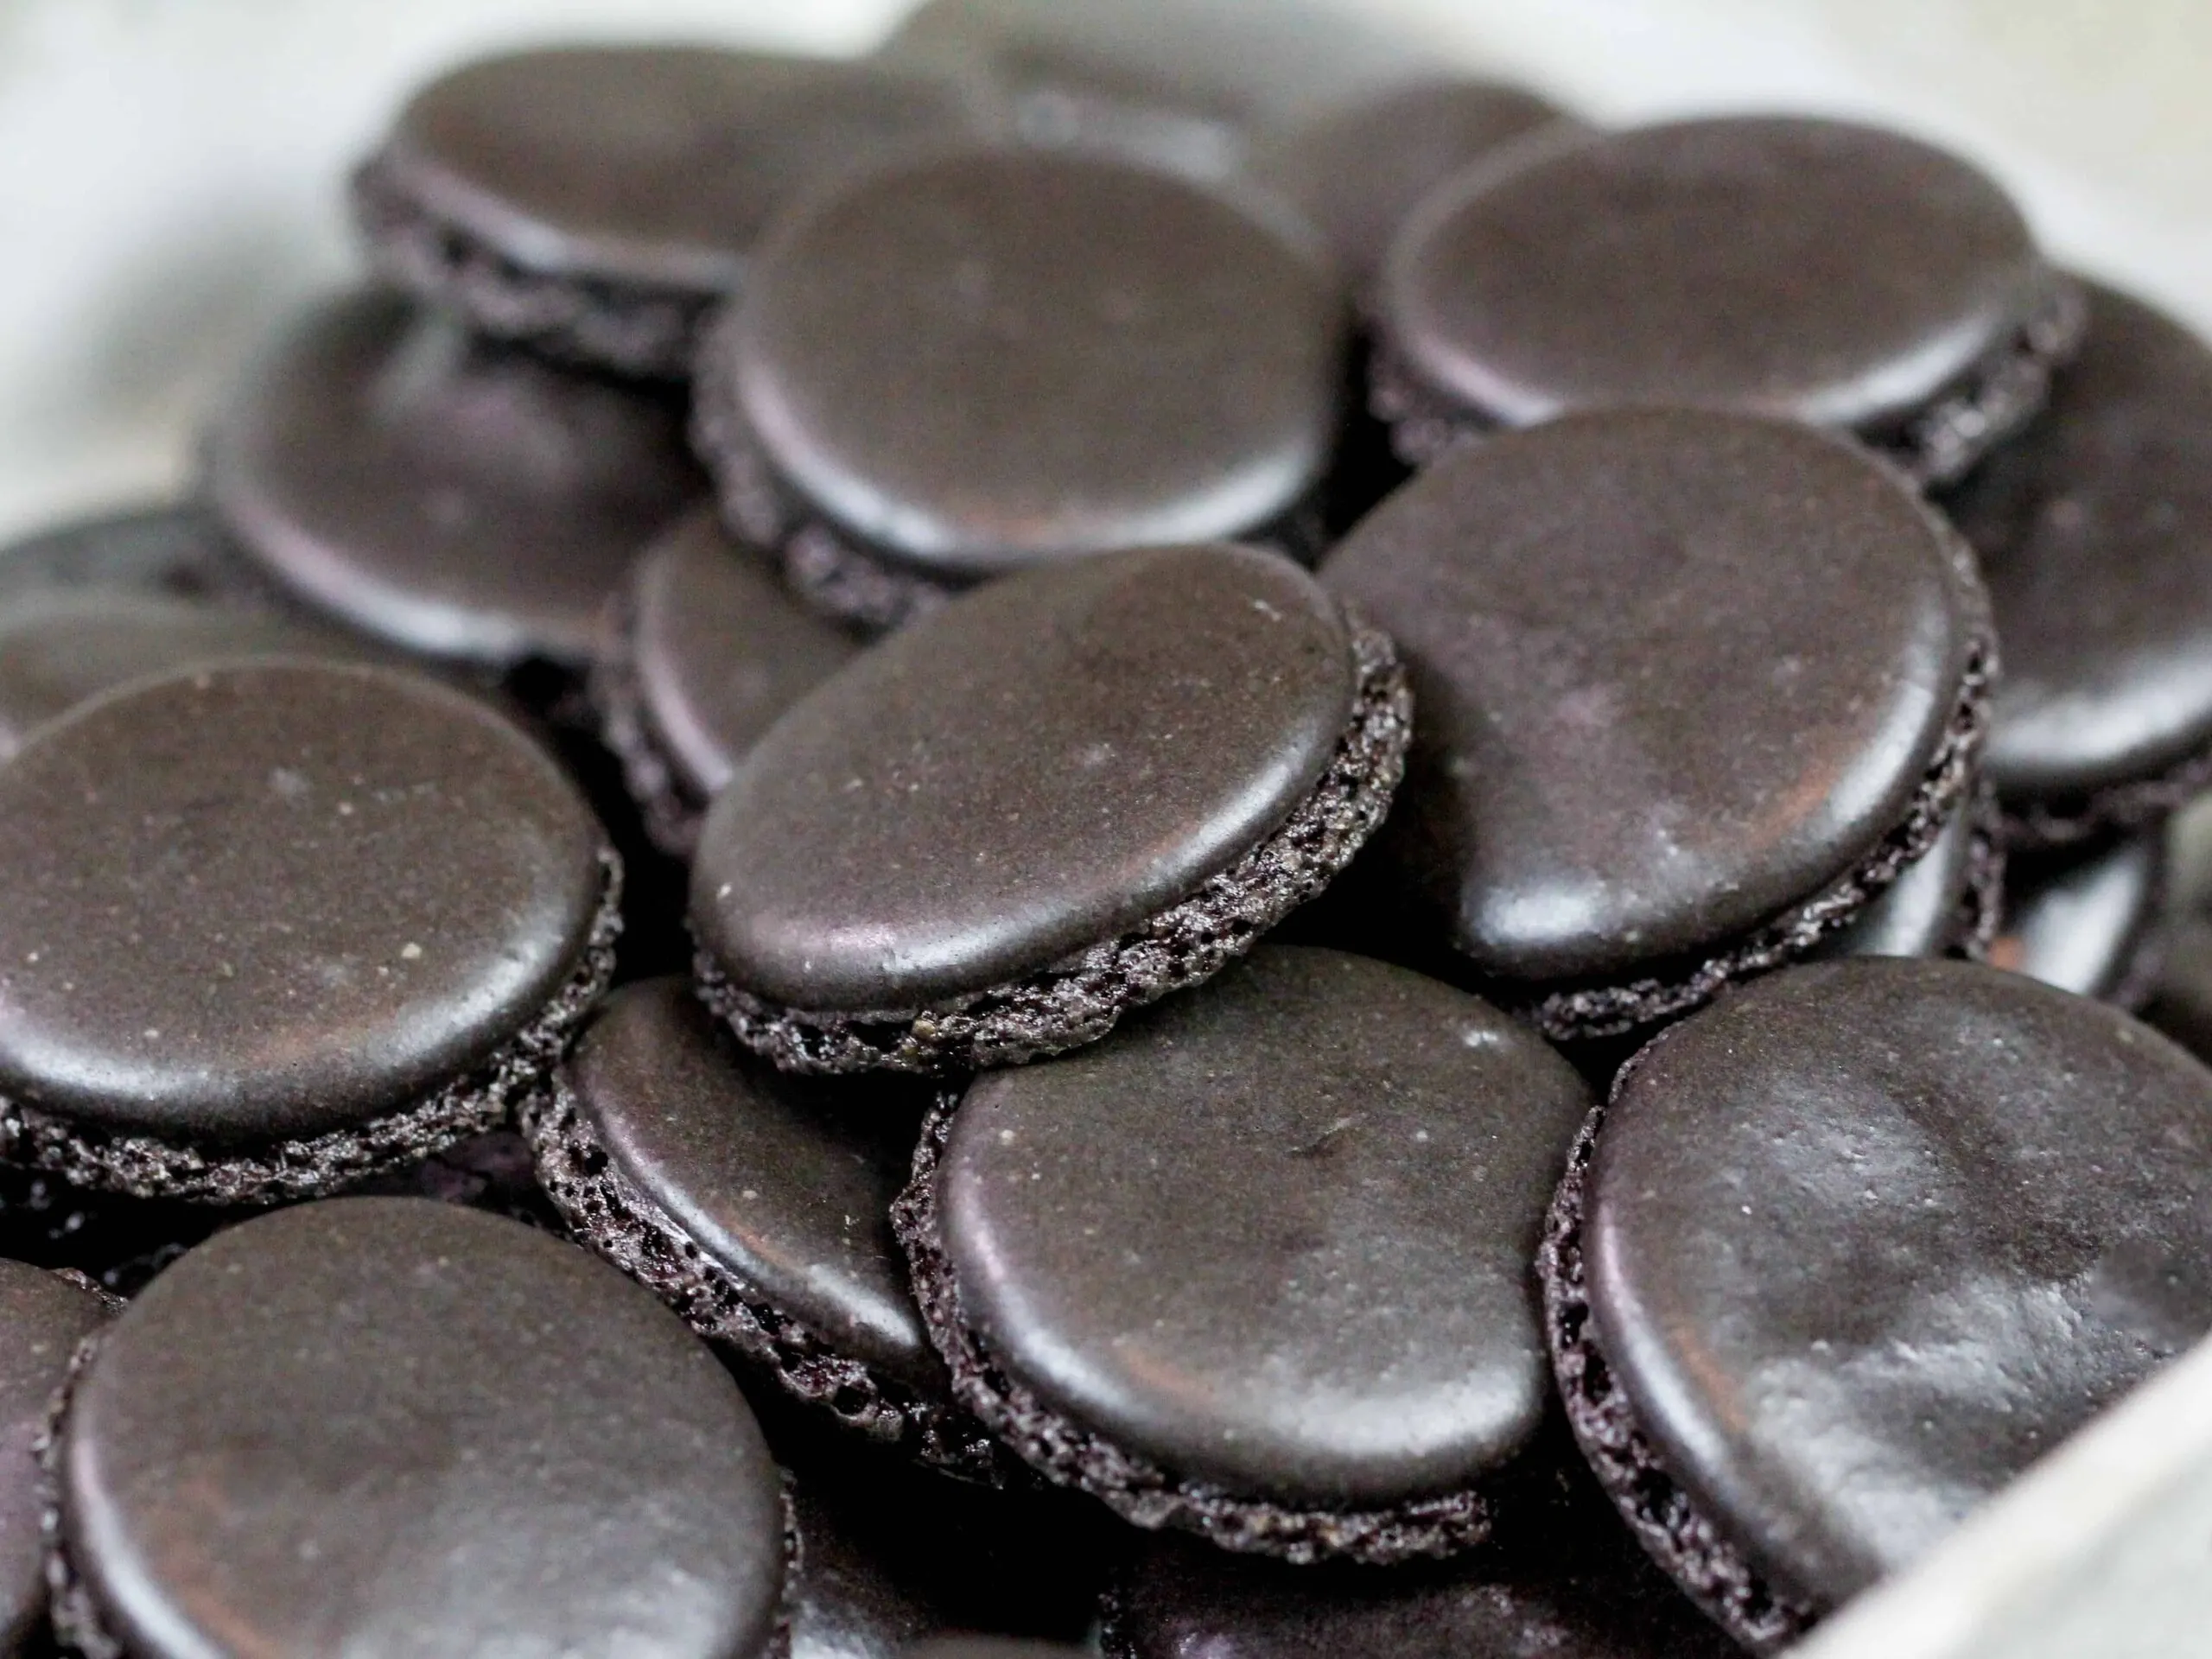 image of black macaron shells that have been baked and cooled and are ready to be filled